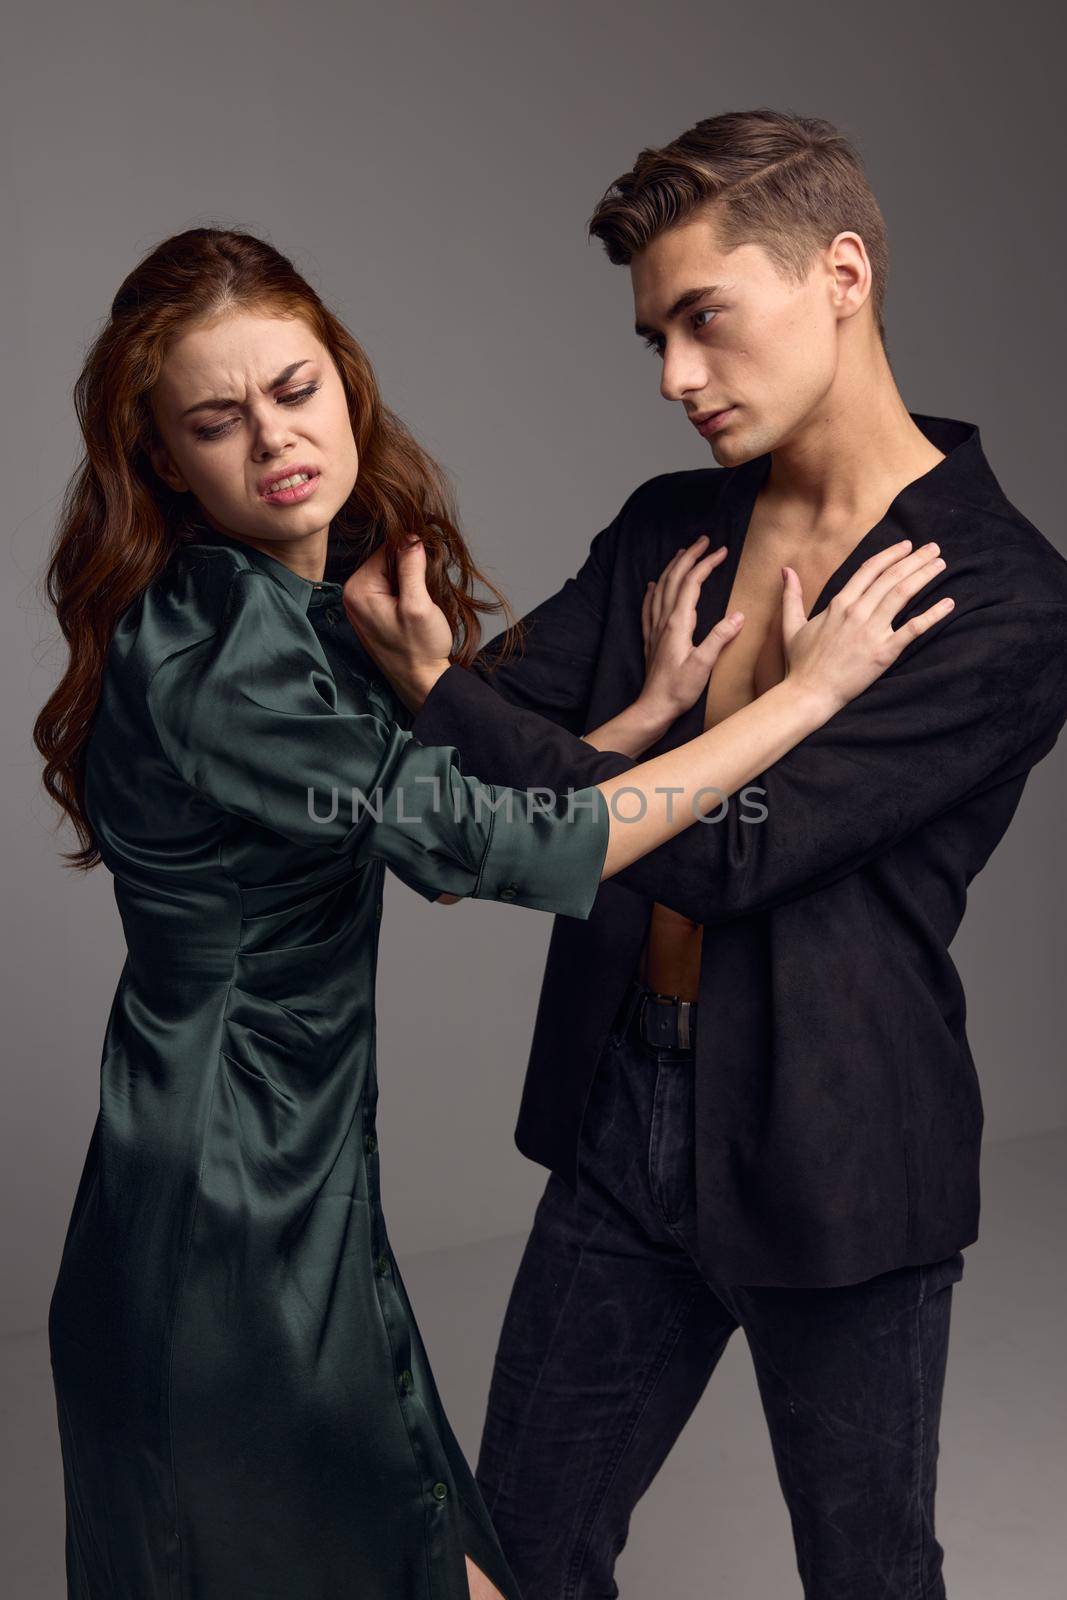 aggressive man and woman fighting on gray background conflict domestic violence. High quality photo